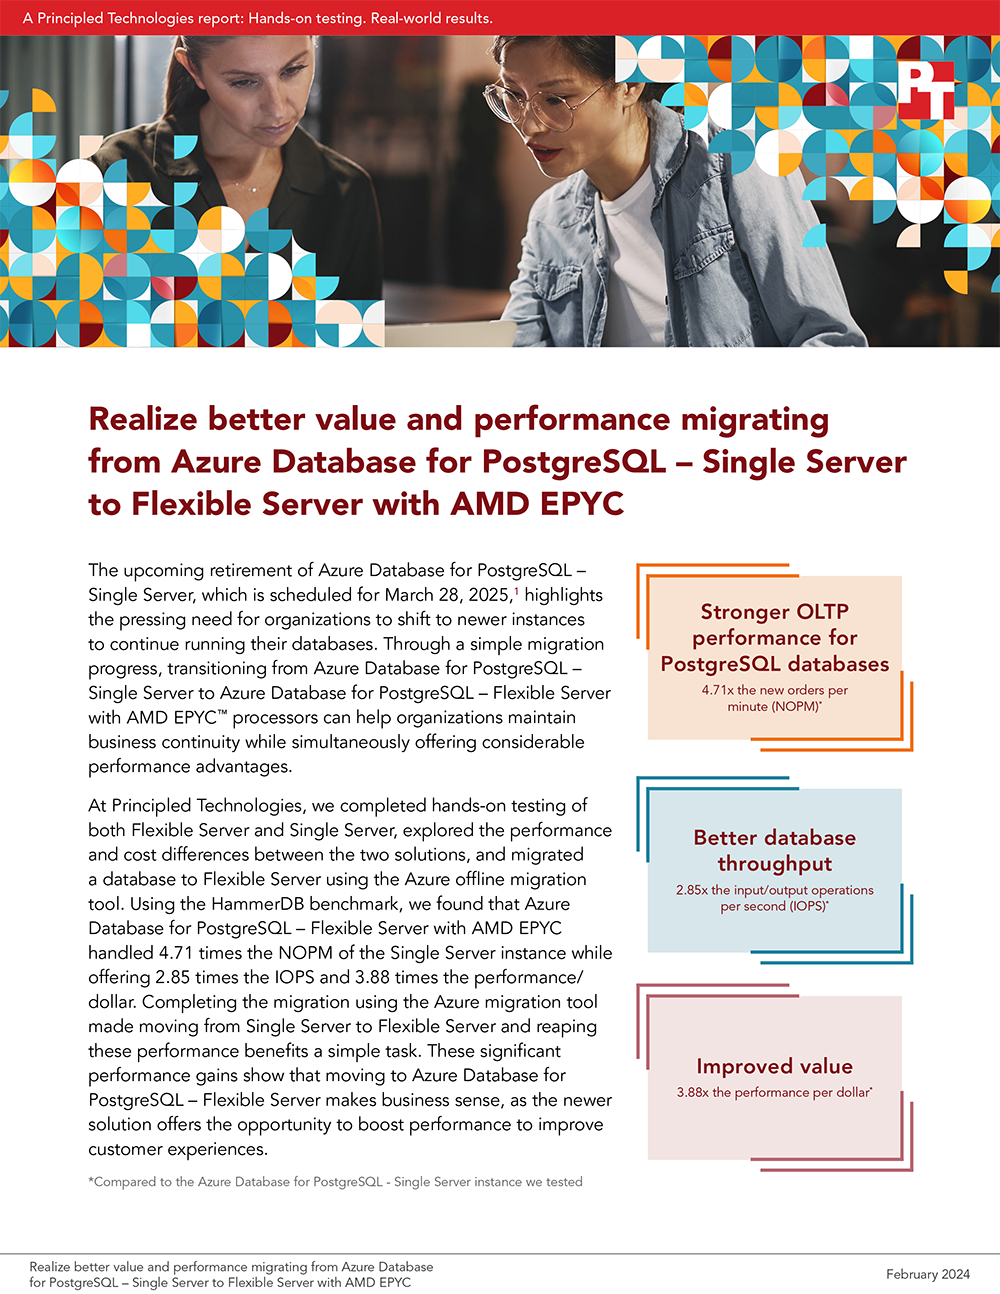 New Principled Technologies Study Finds That Organizations Can Realize Better Value and Performance with Azure Database for PostgreSQL – Flexible Server